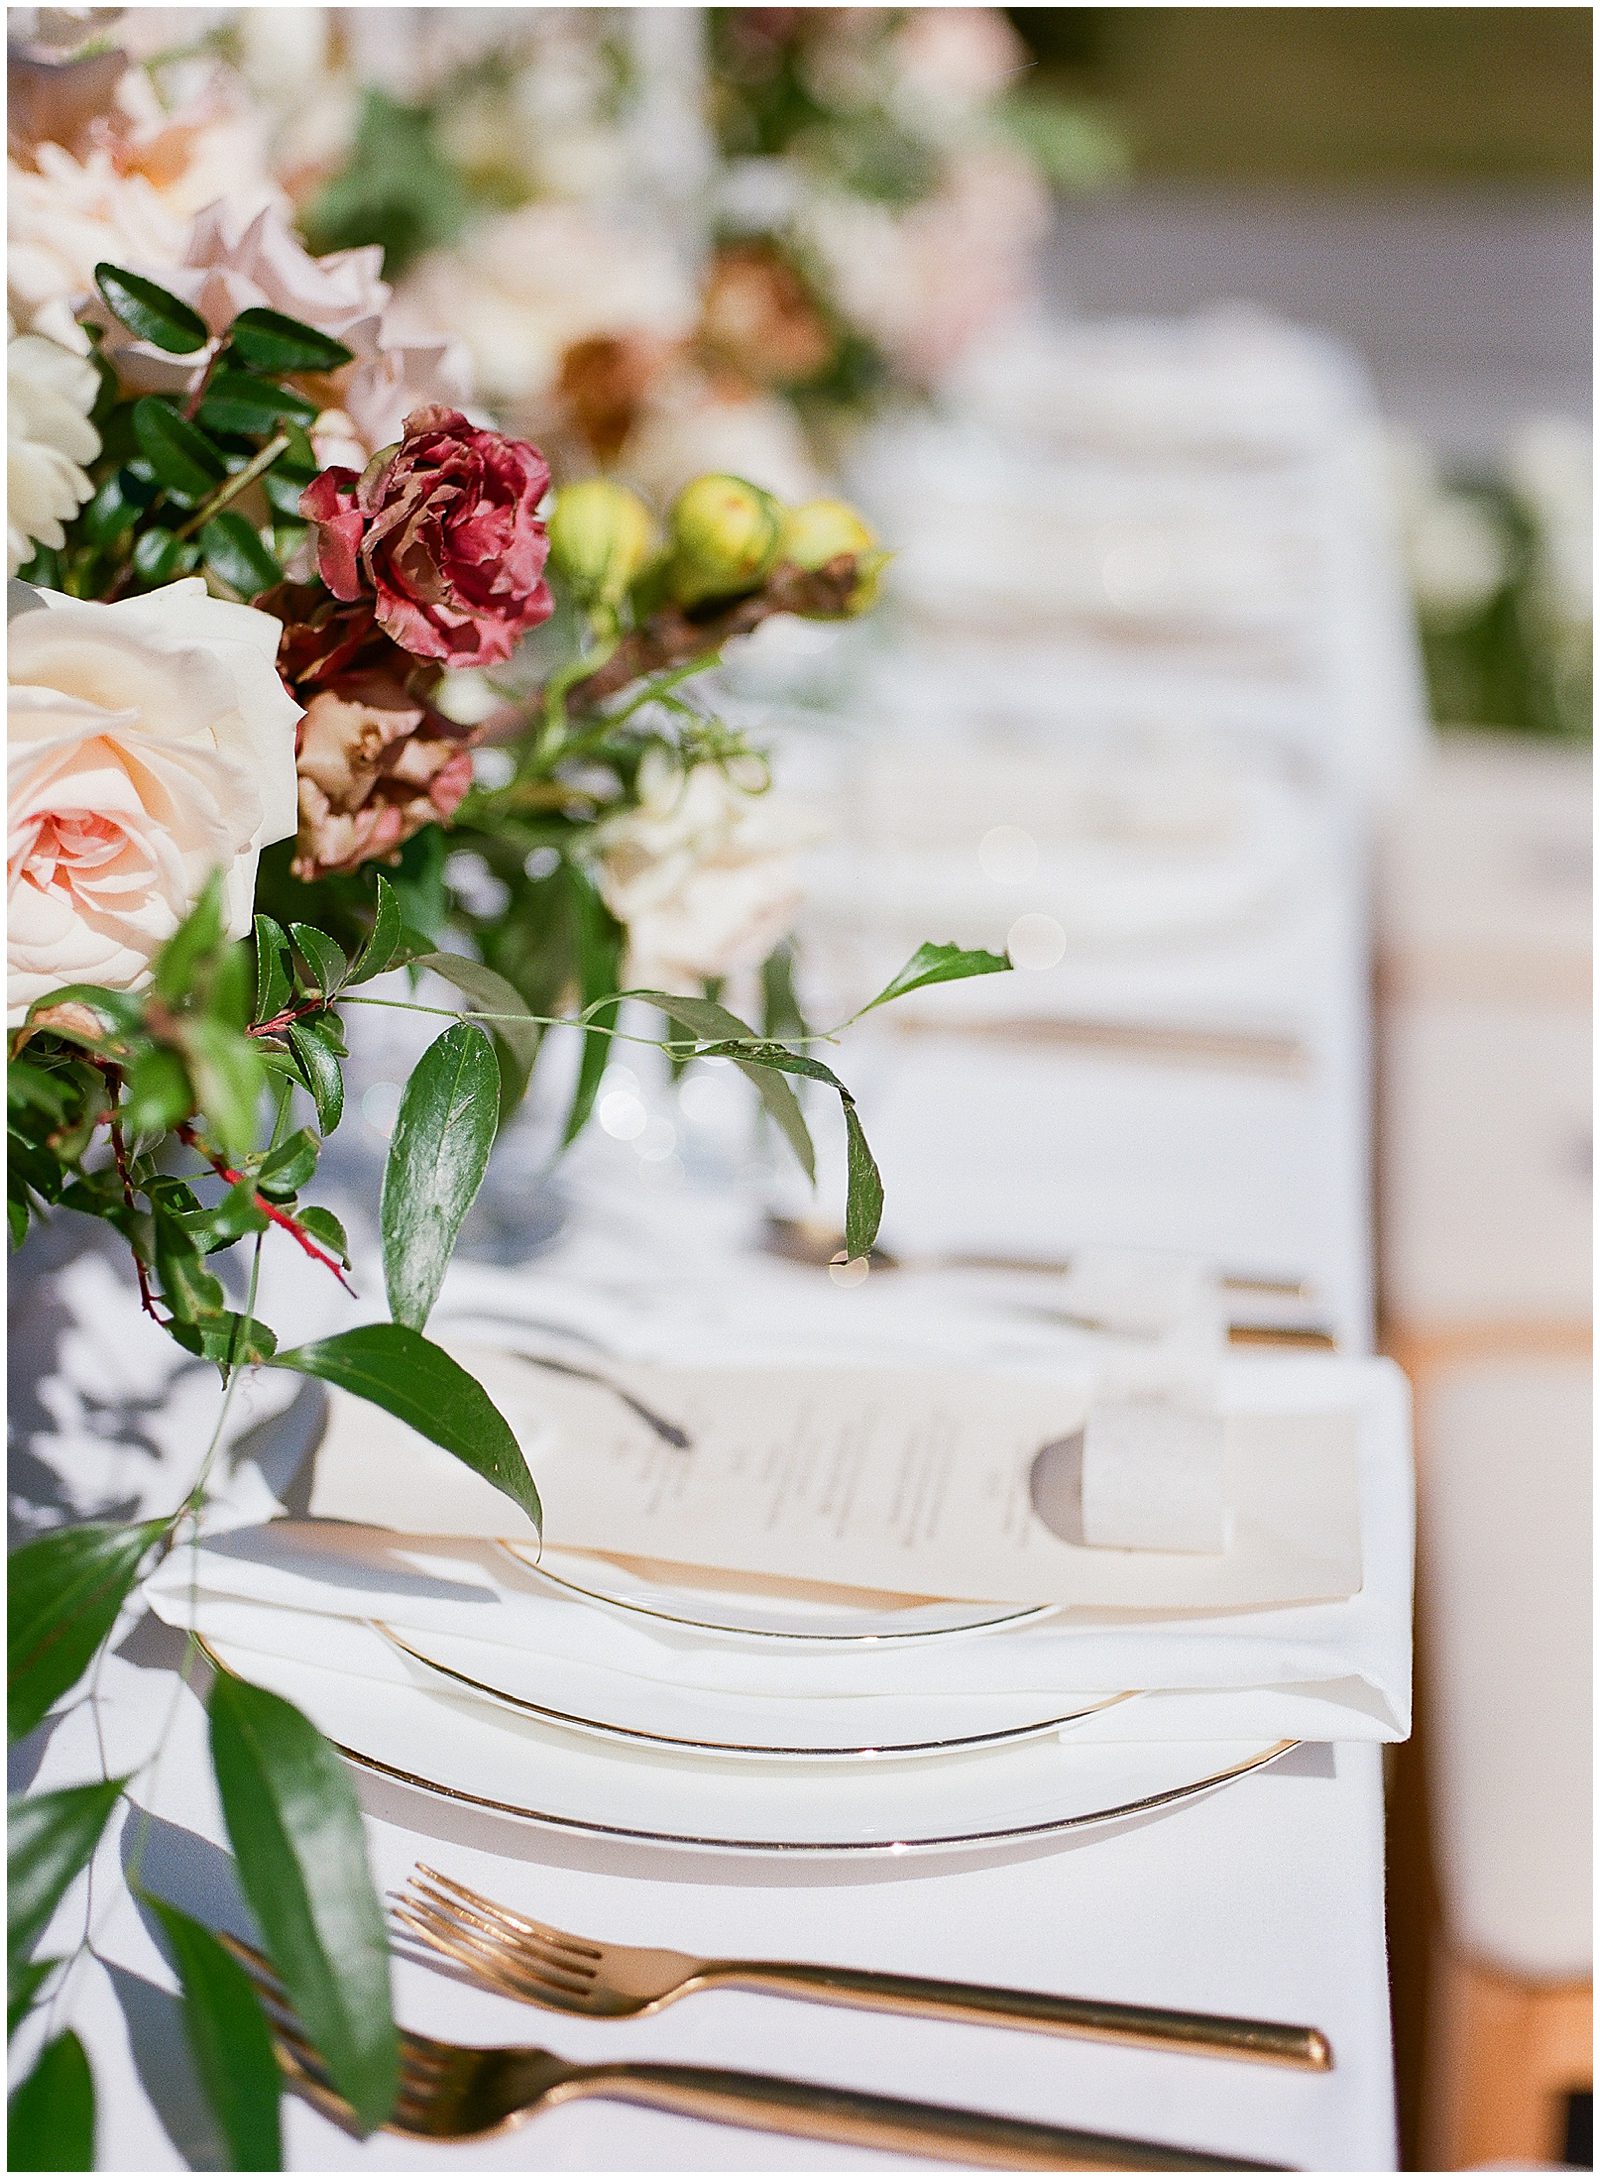 Wedding Reception Florals and Place Settings Photo